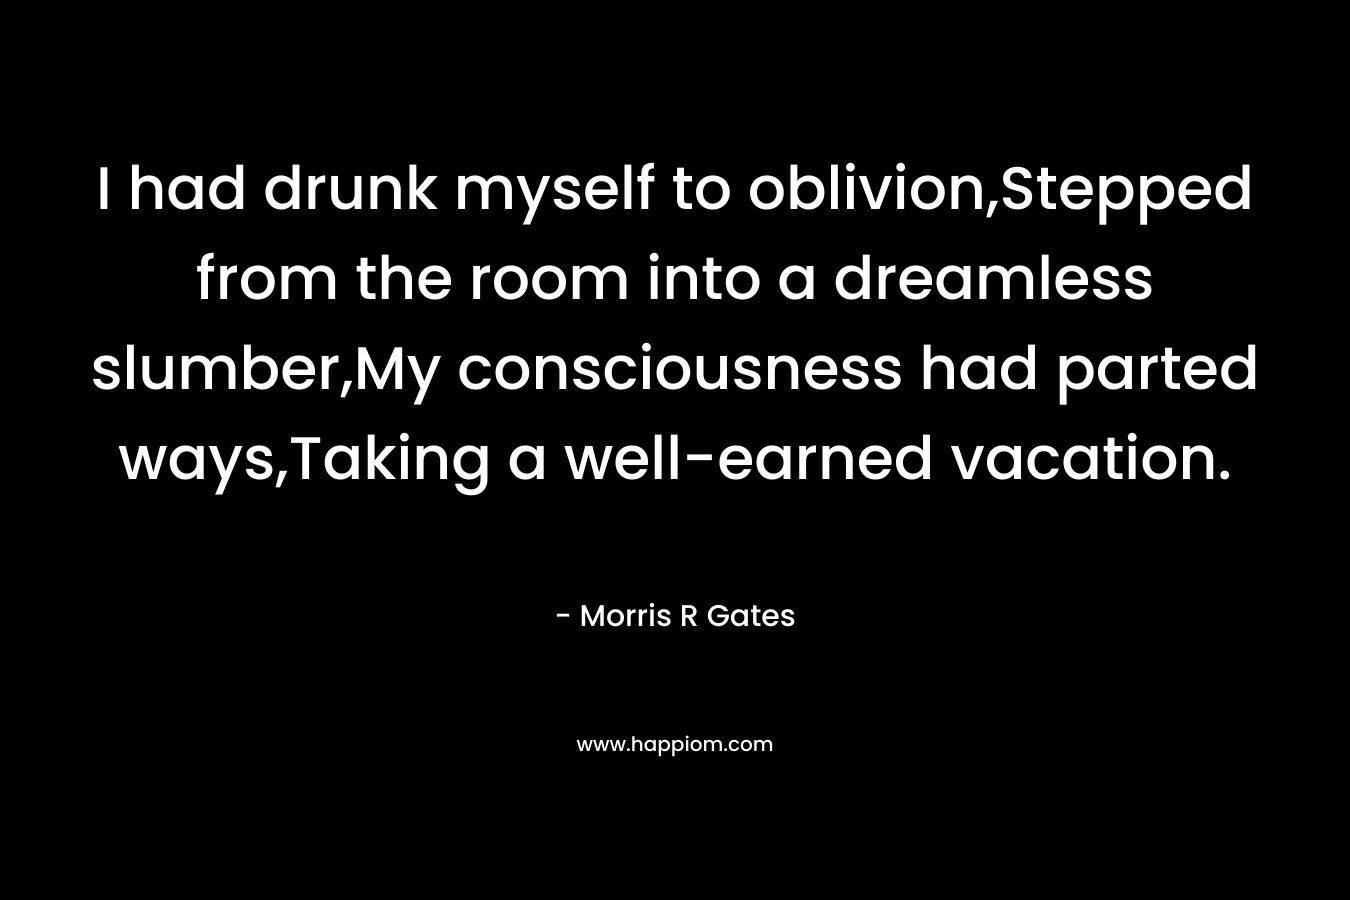 I had drunk myself to oblivion,Stepped from the room into a dreamless slumber,My consciousness had parted ways,Taking a well-earned vacation.